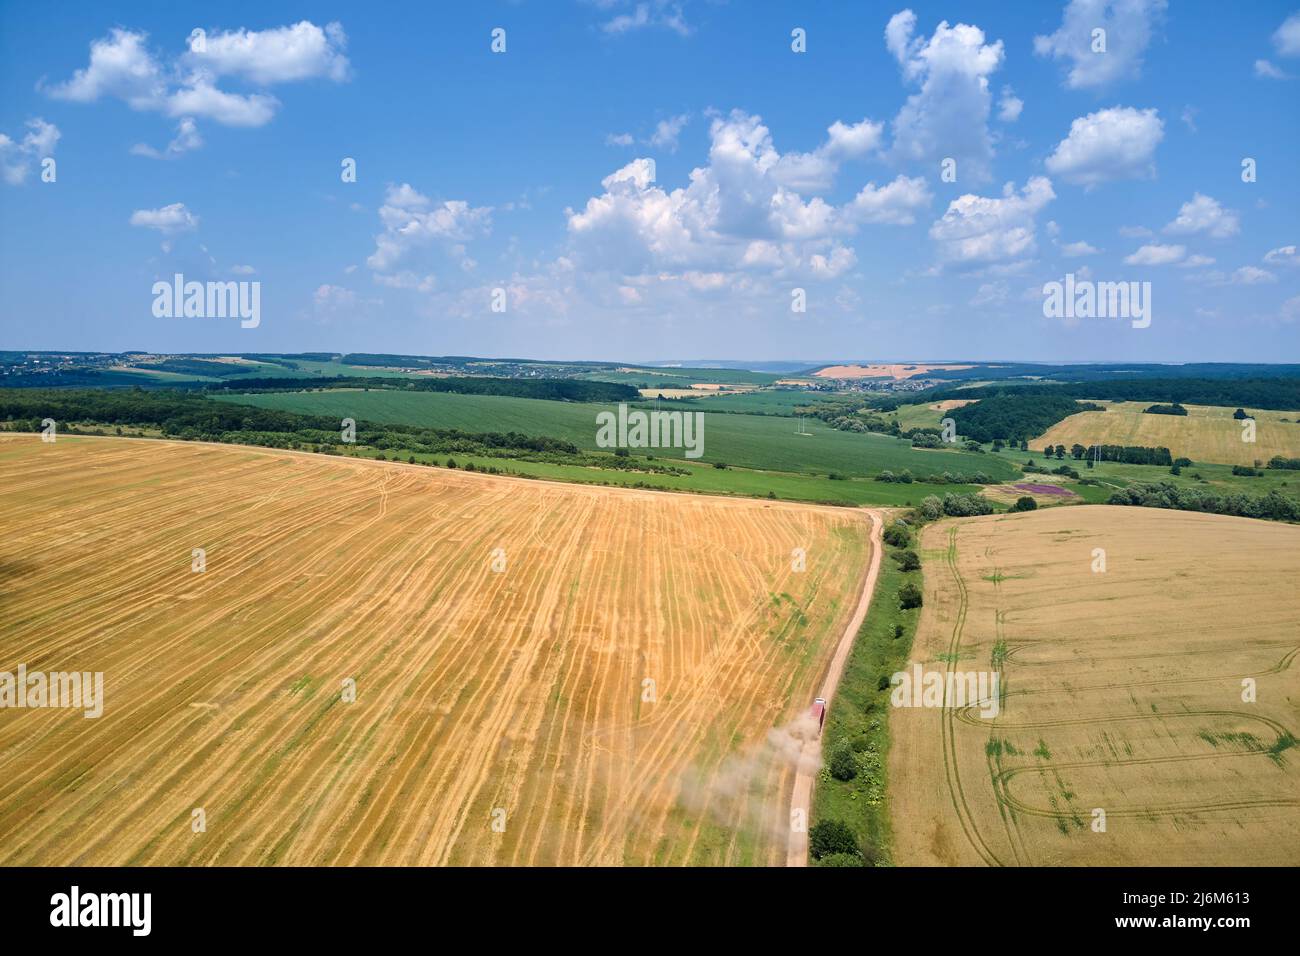 Aerial view of cargo truck driving on dirt road between agricultural wheat fields making lot of dust. Transportation of grain after being harvested by Stock Photo